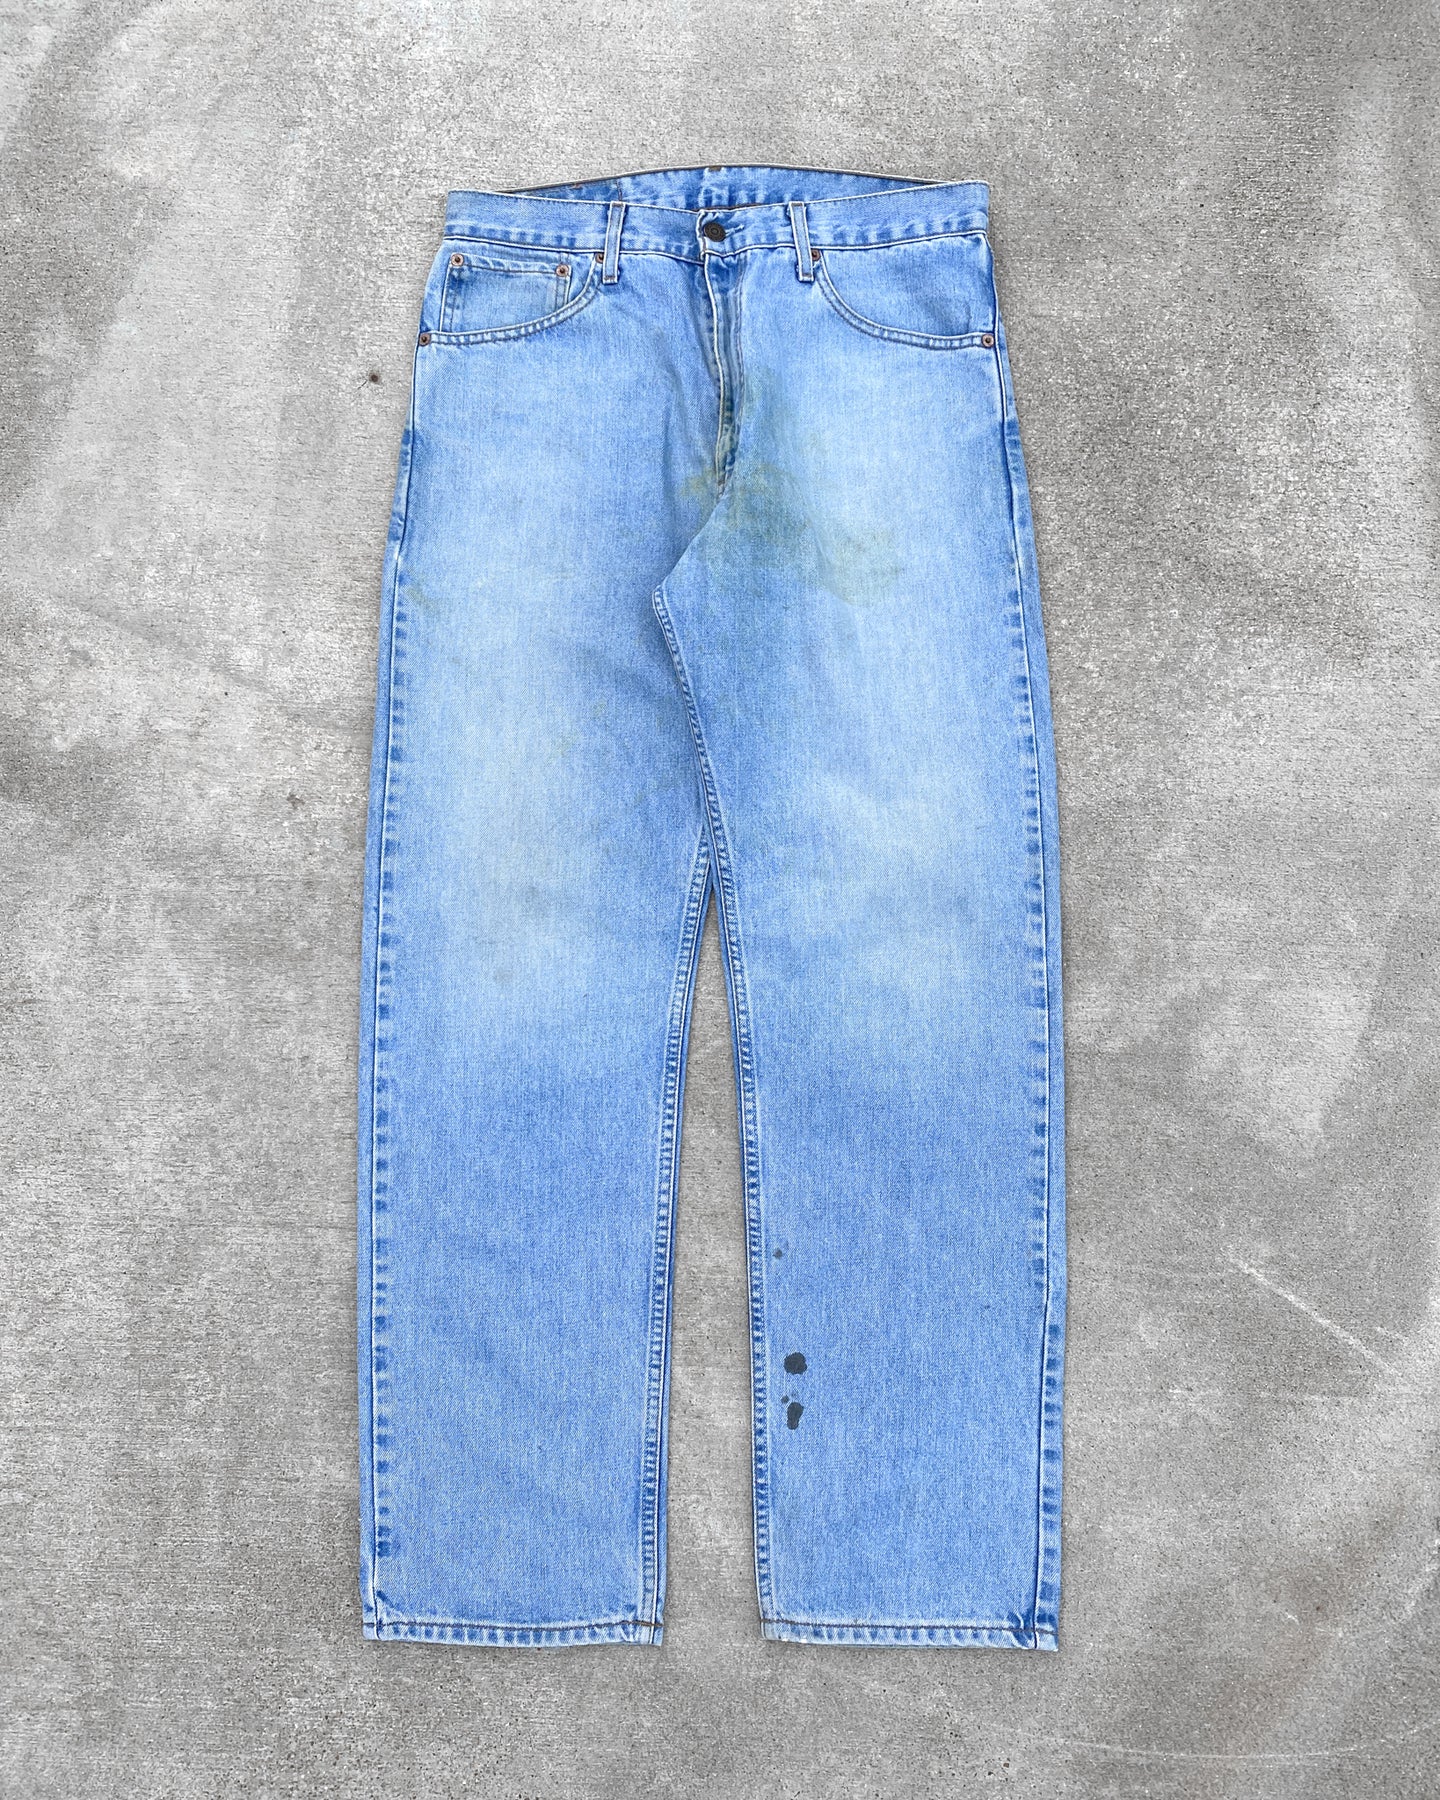 1990s Levi's Dirt Wash 505 with Removed Pocket - Size 32 x 31